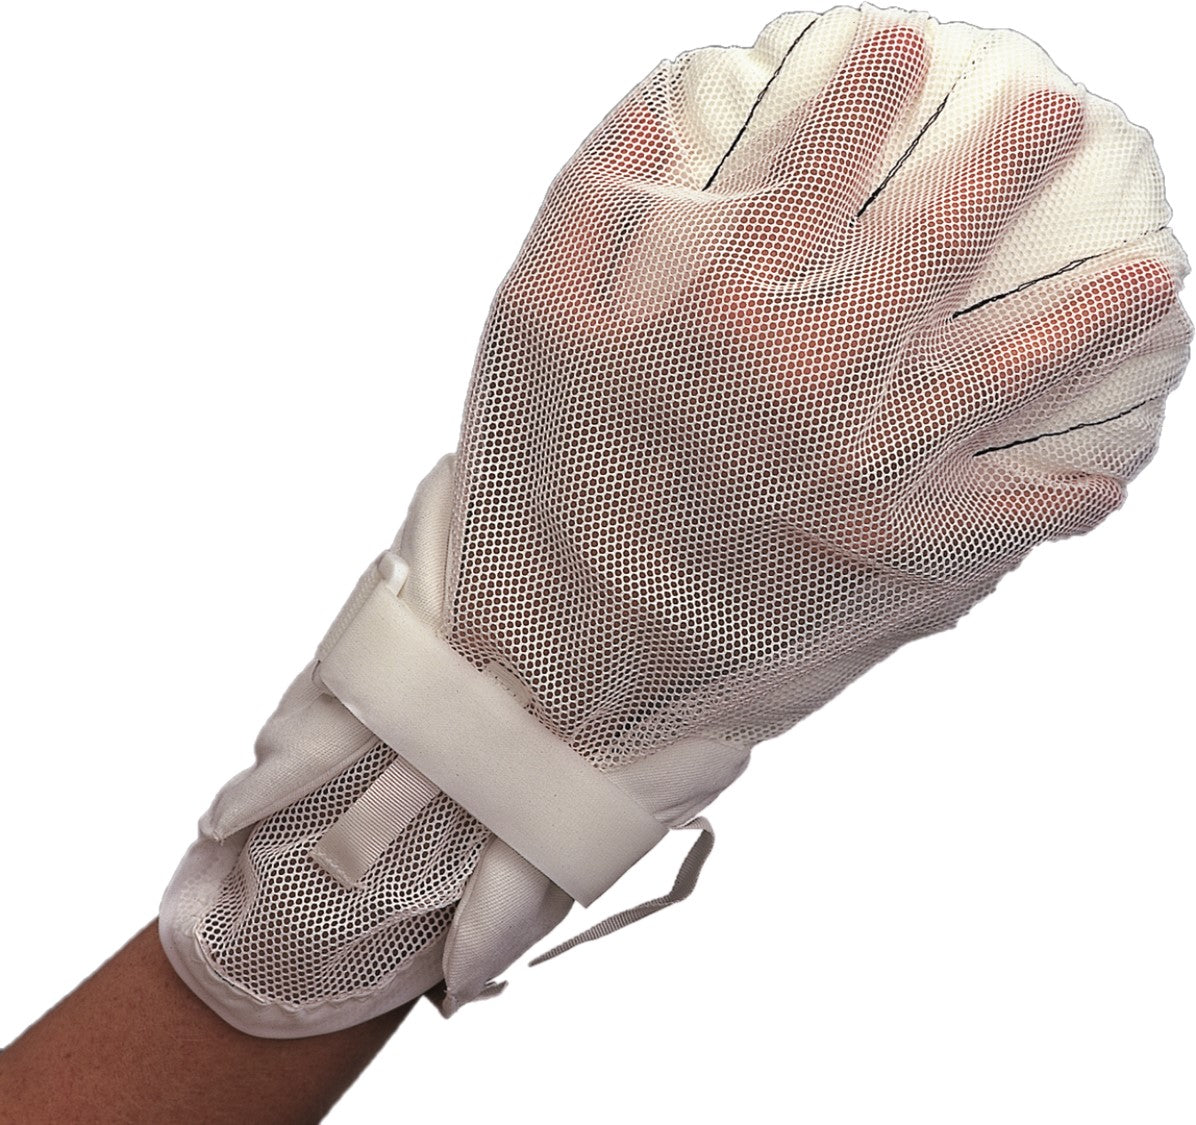 Finger Control Mitts (Closed)